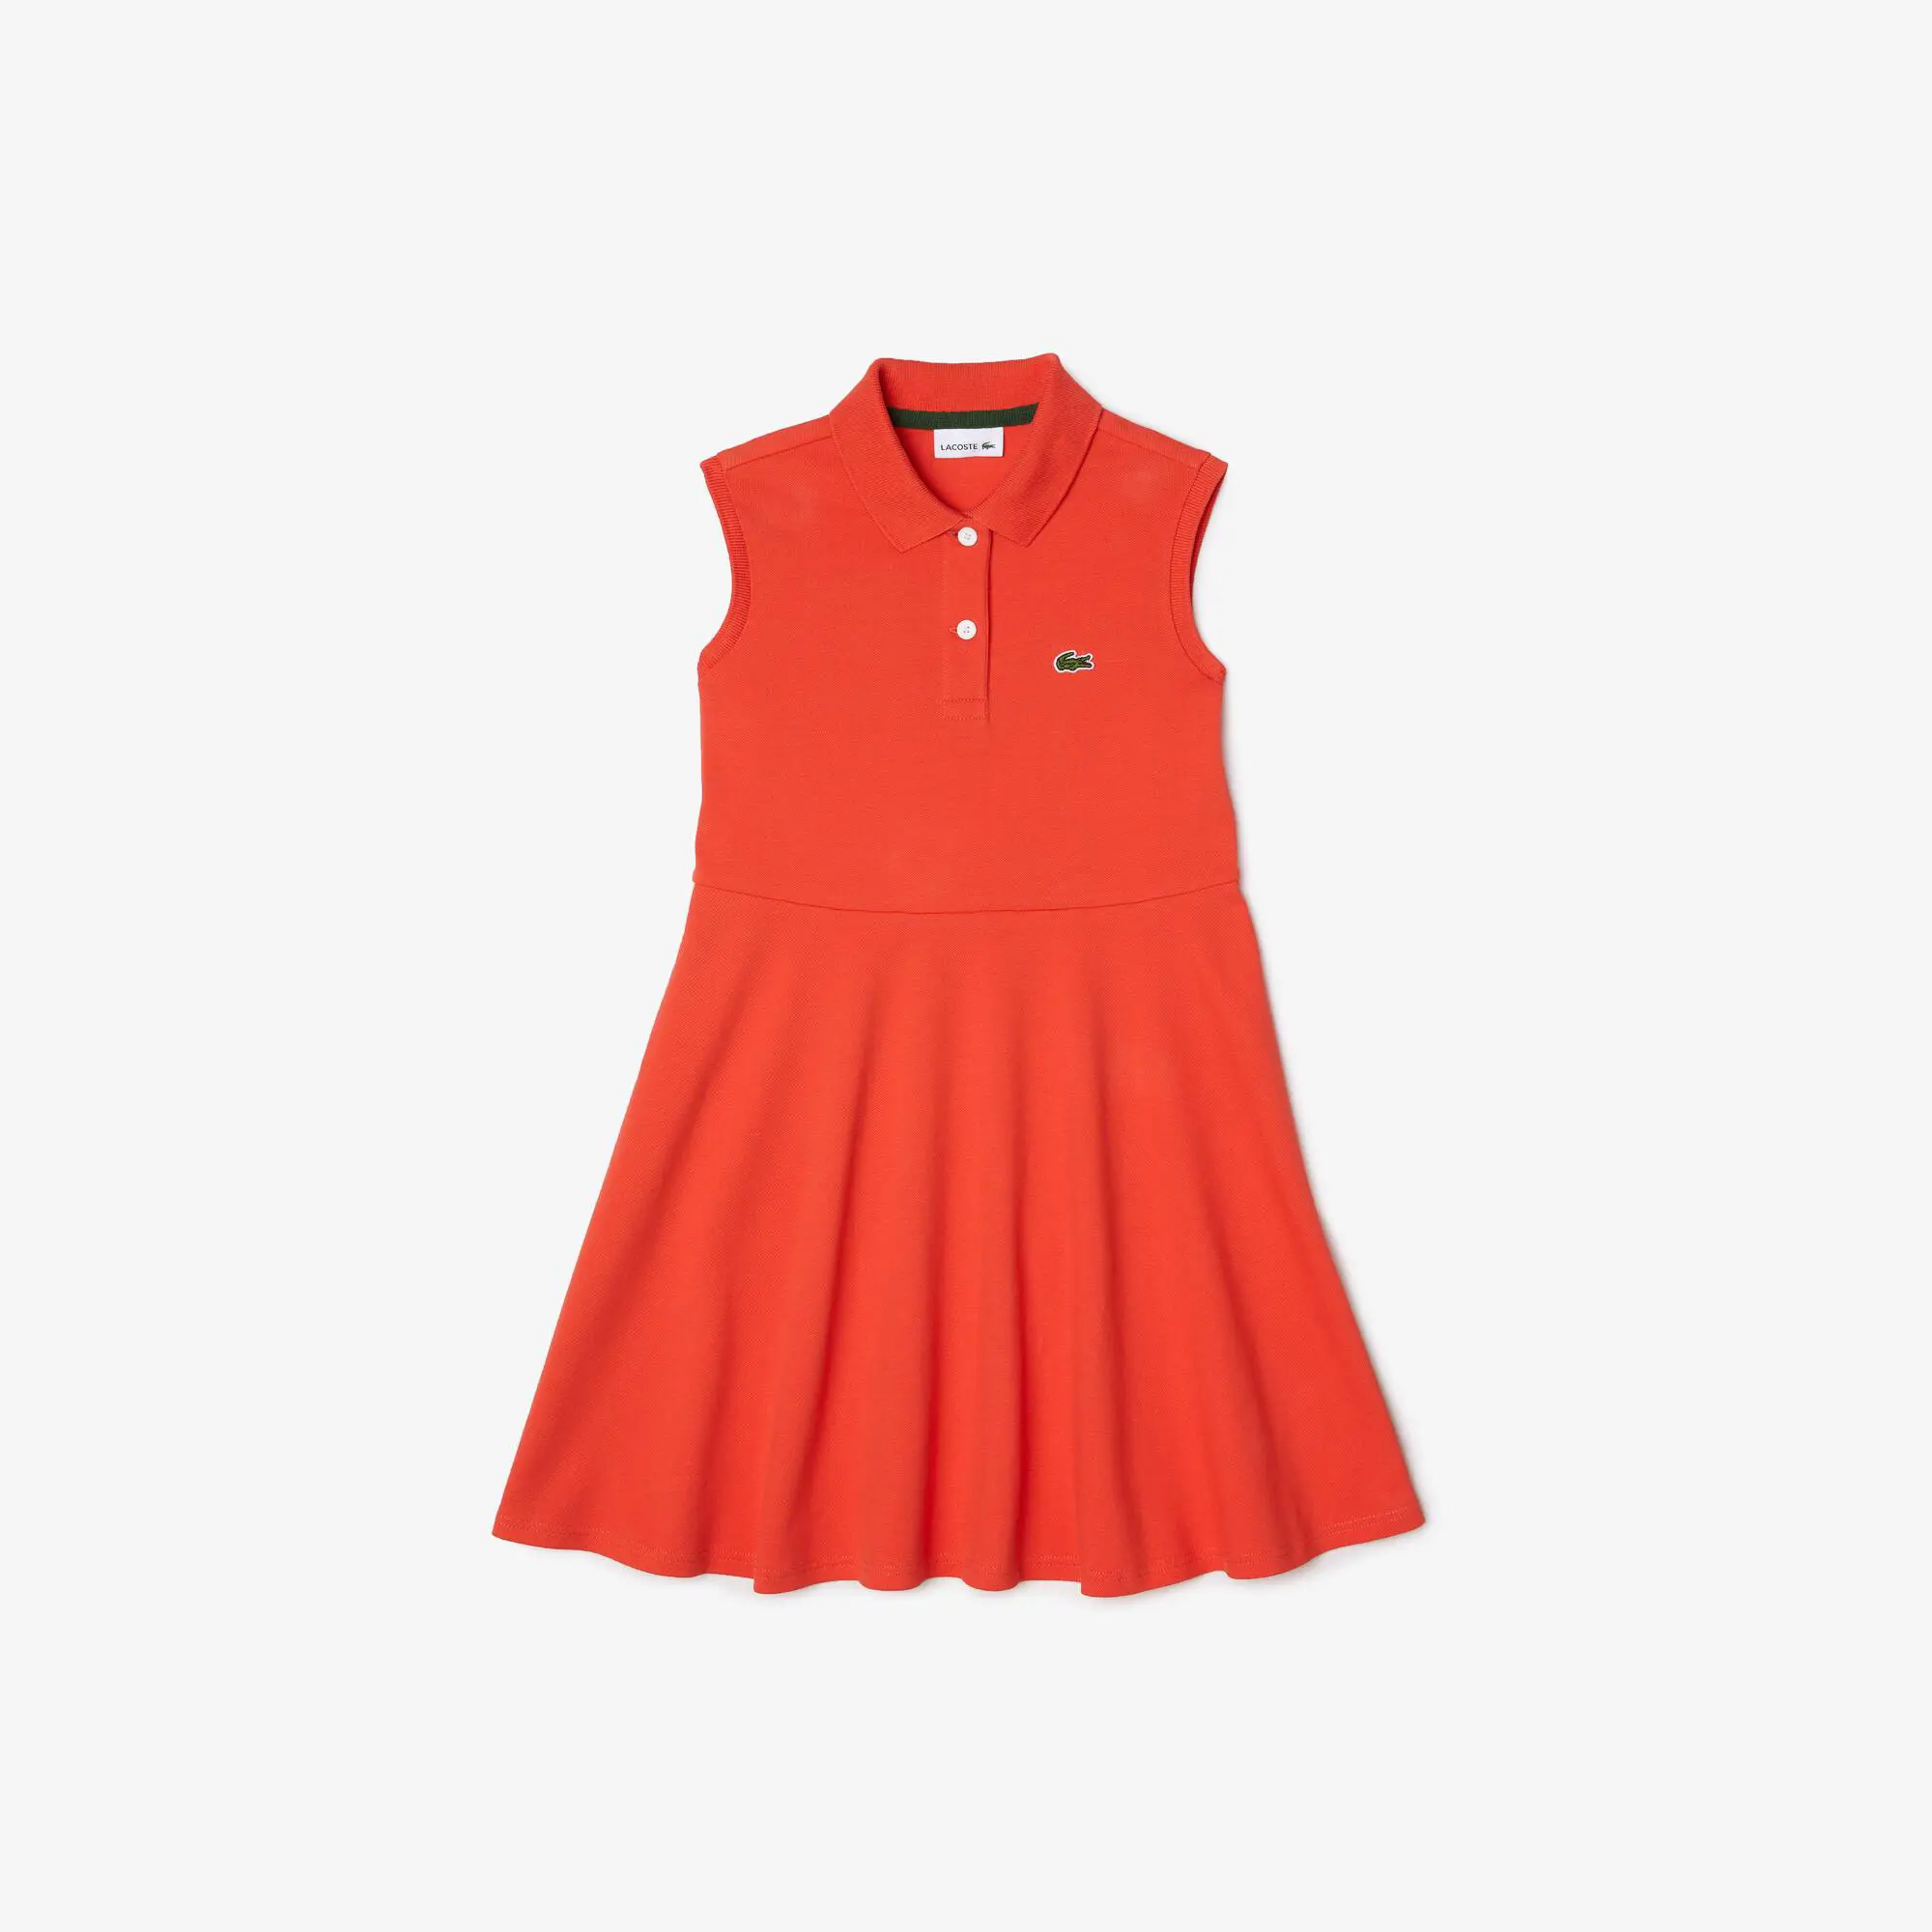 Lacoste Girls’ Lacoste Fit and Flare Stretch Piqué Polo Dress. 2